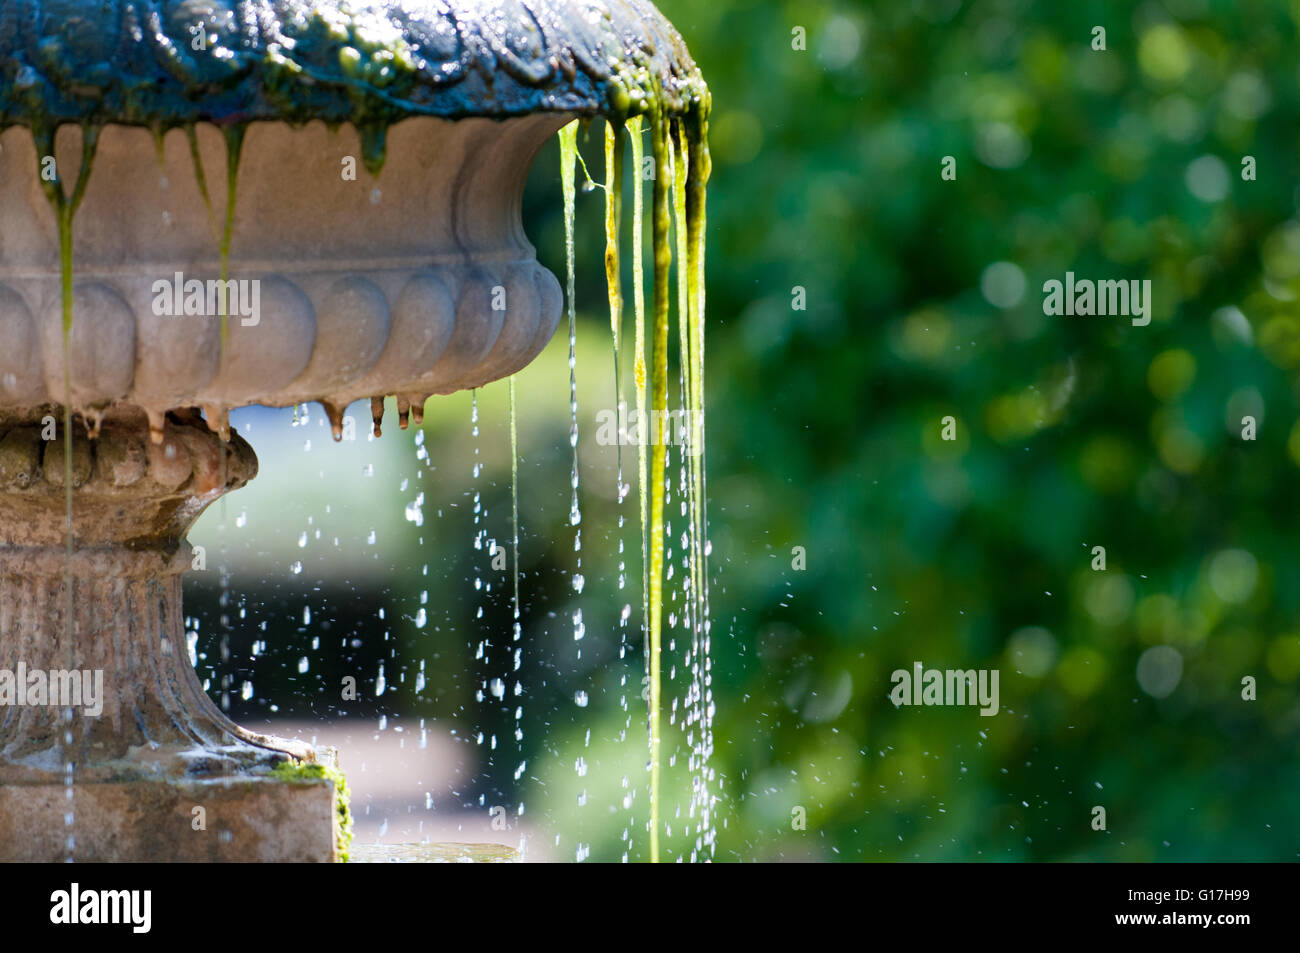 Close up of cool refreshing water splashing from a garden fountain Stock Photo